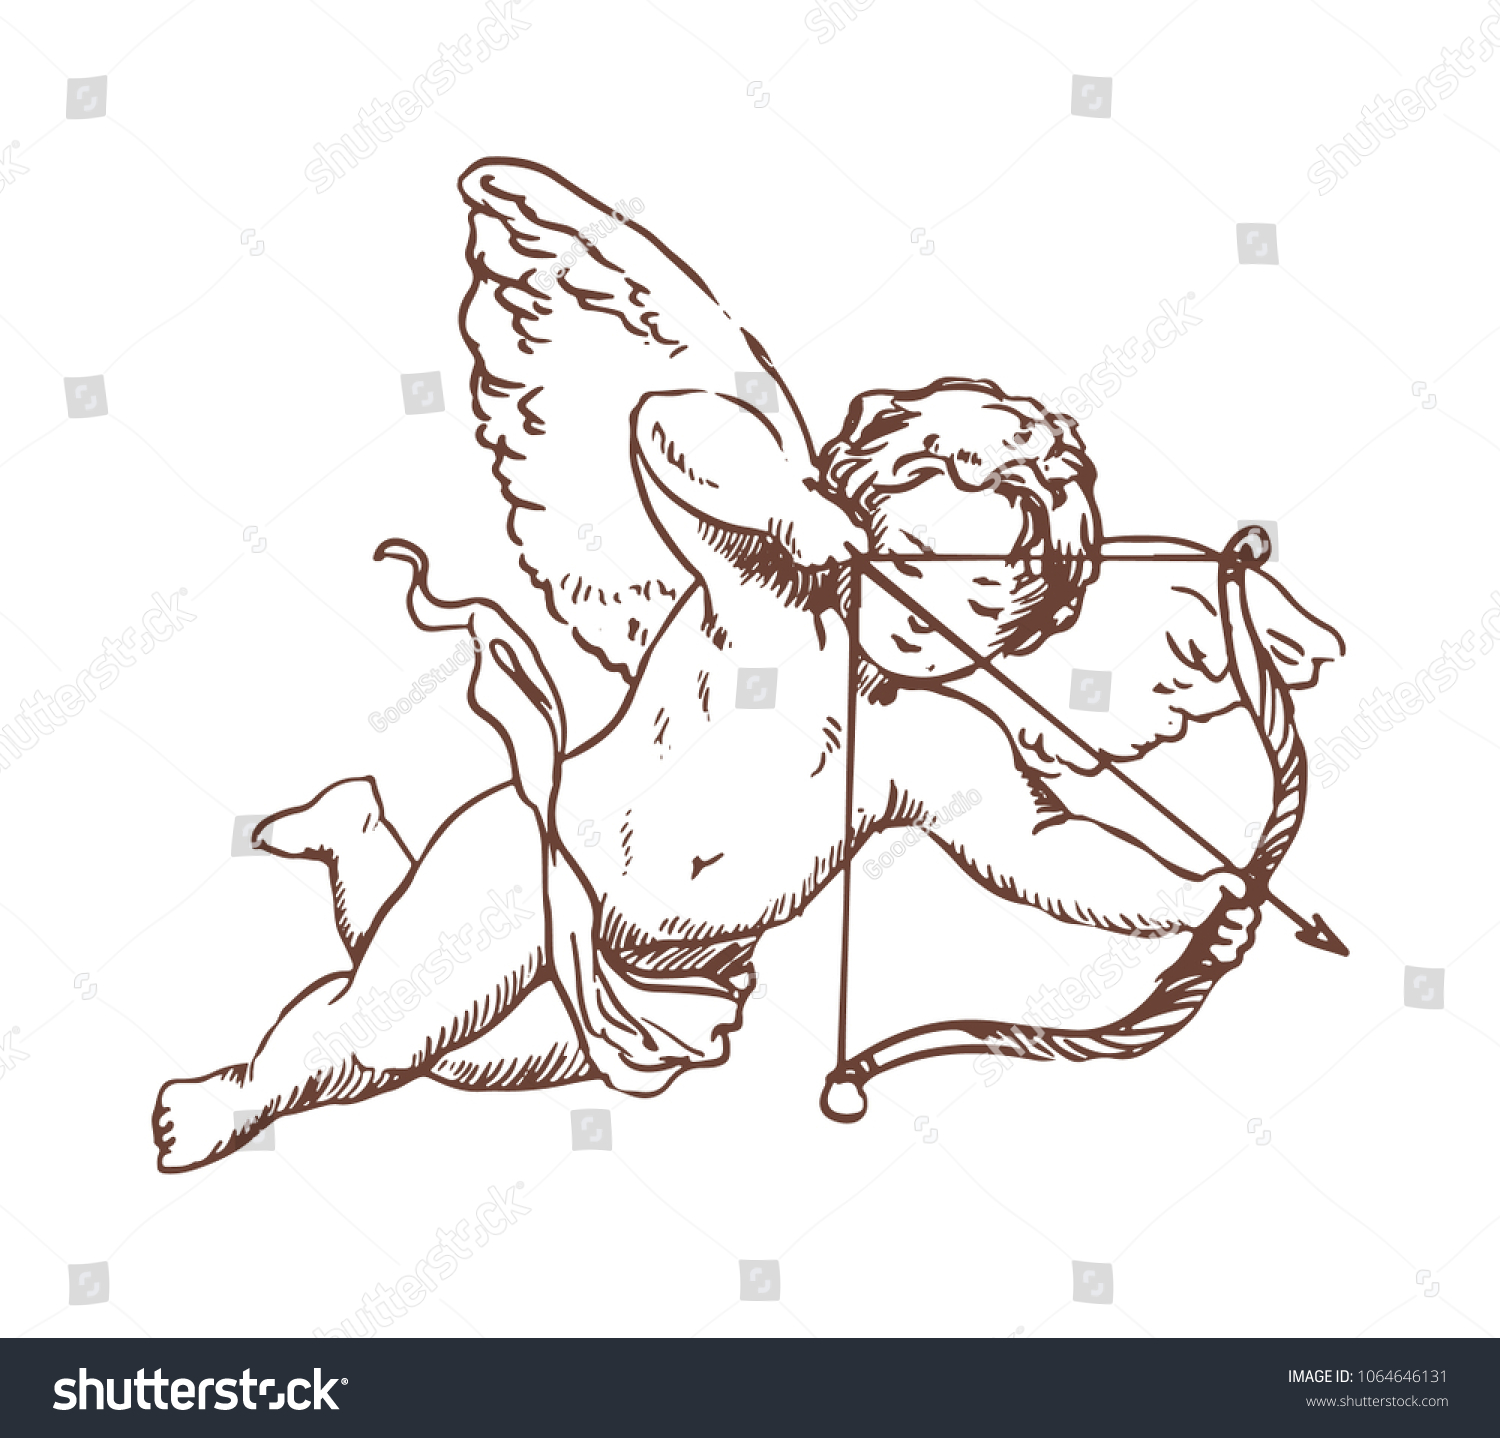 SVG of Flying Cupid holding bow and aiming or shooting arrow hand drawn with contour lines on white background. God of love, Amor, Eros or mythological character with wings. Monochrome vector illustration. svg